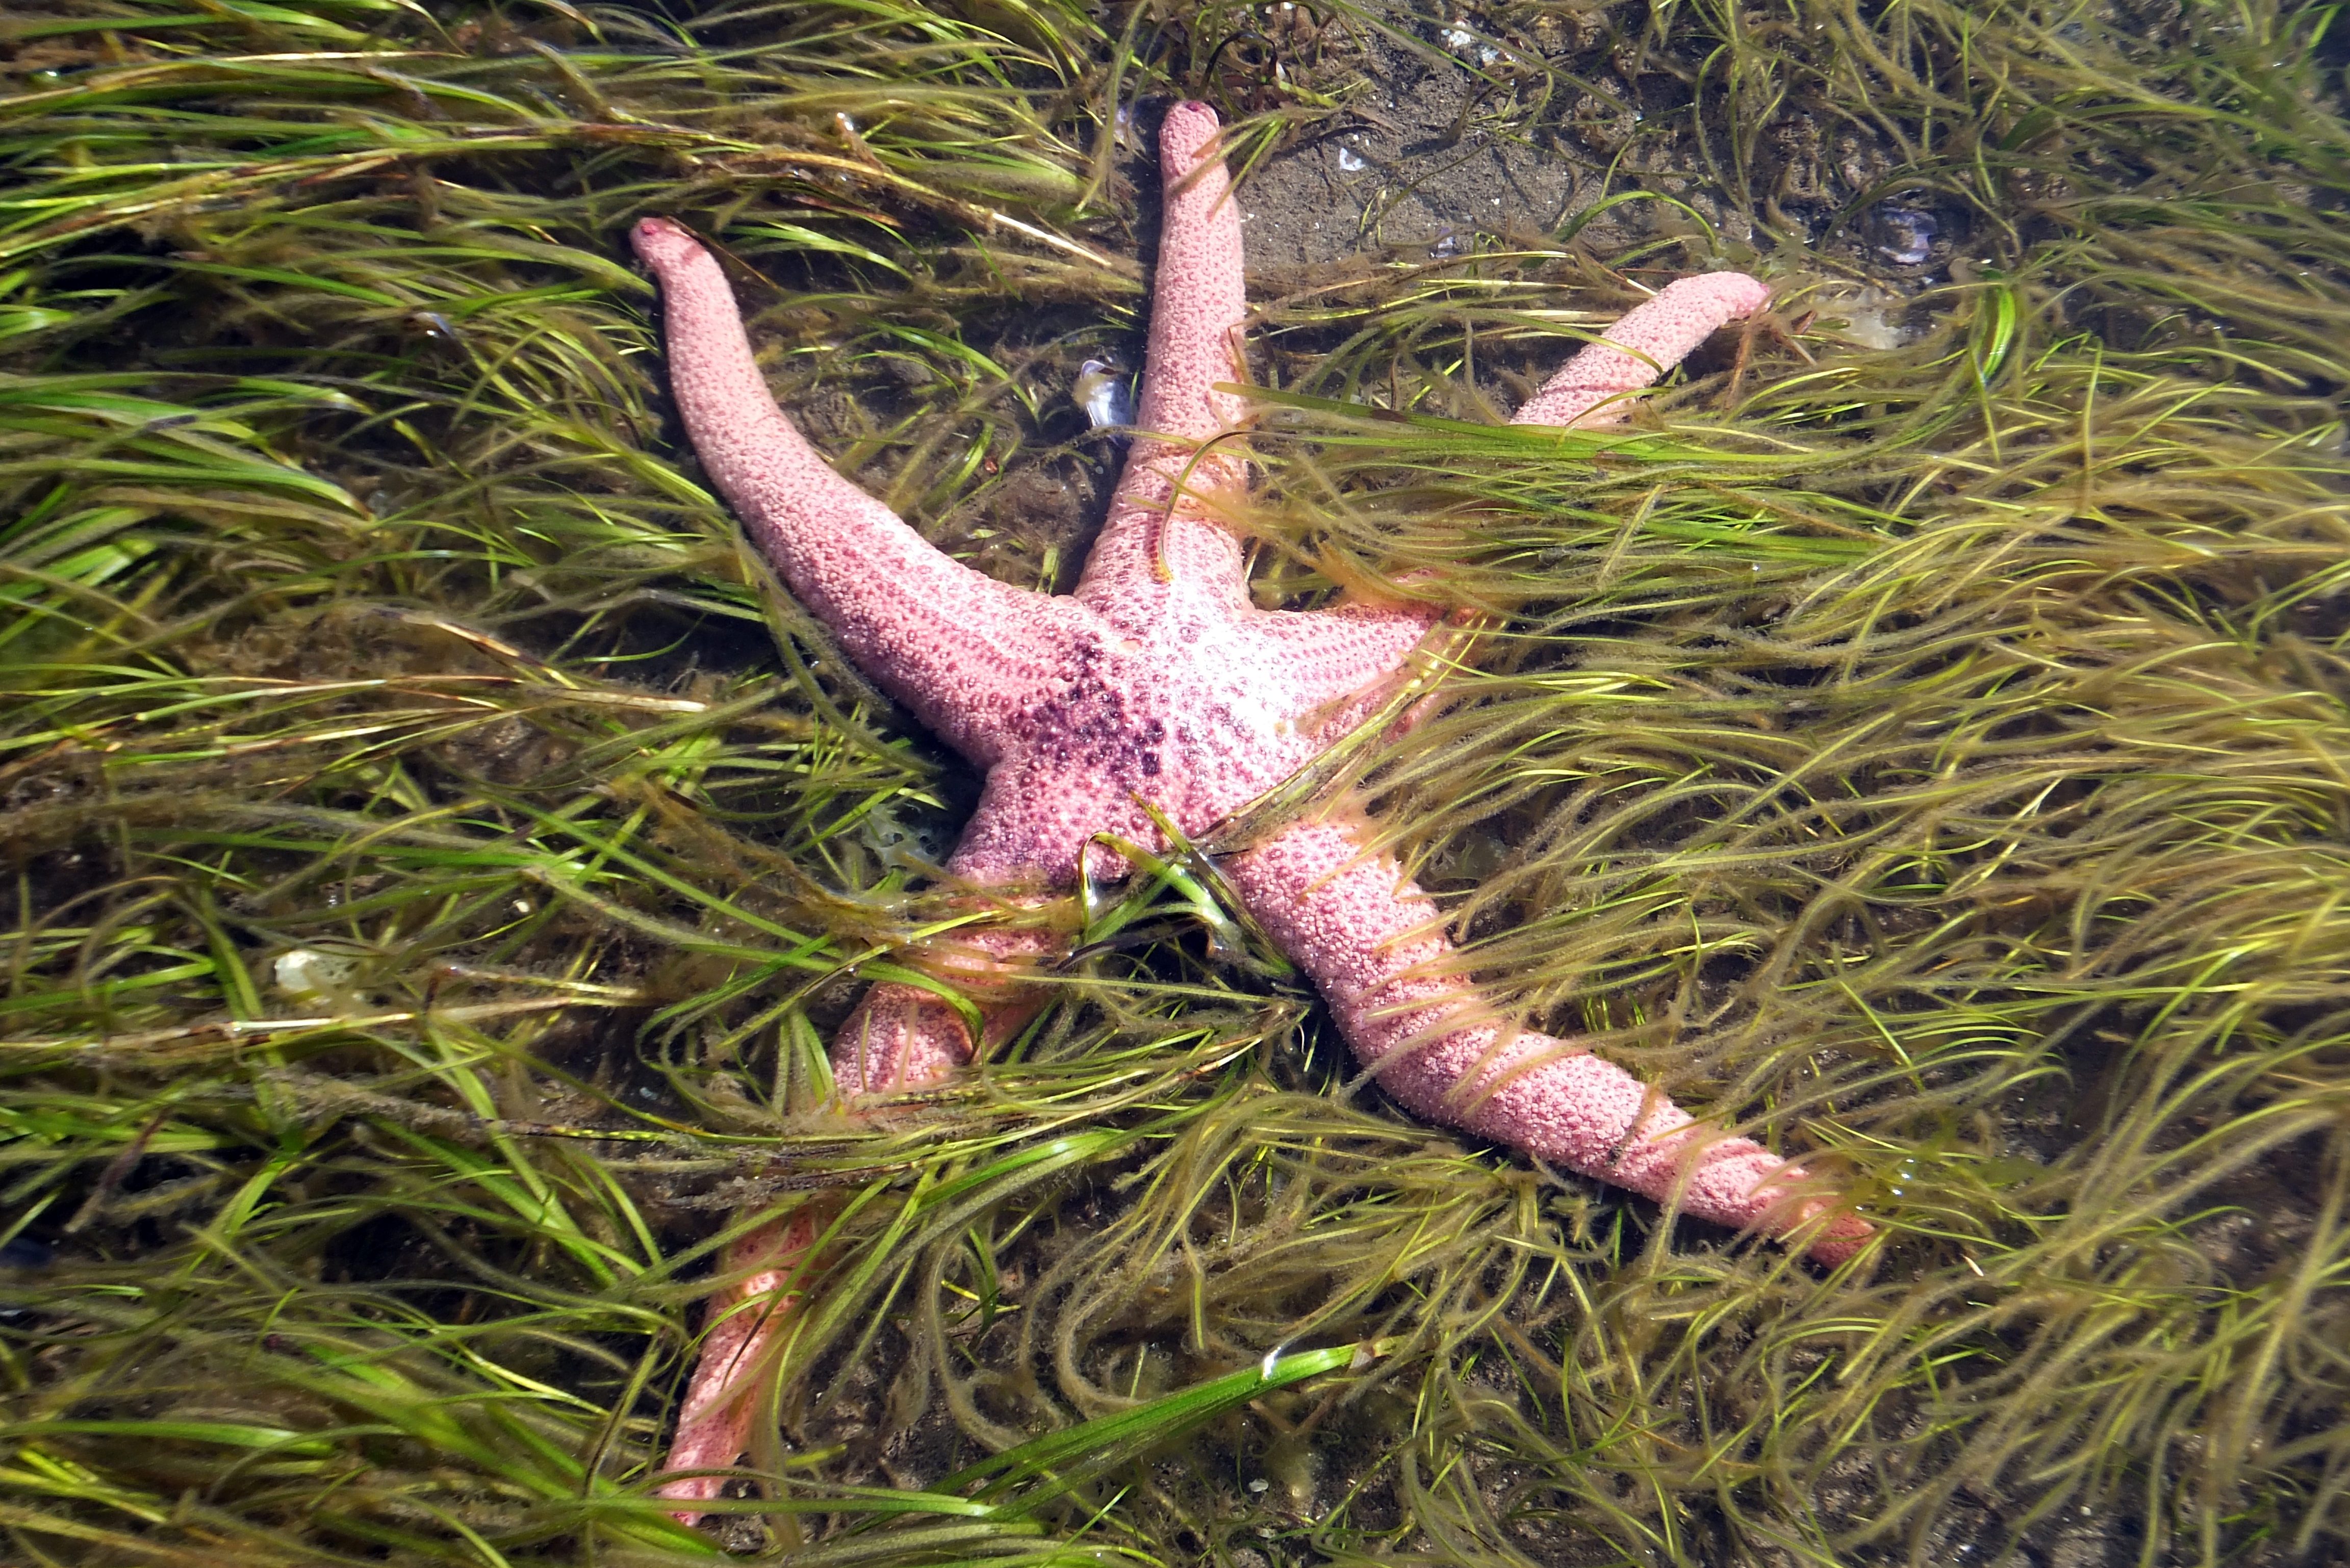 Giant Pink Sea Star in sea grass